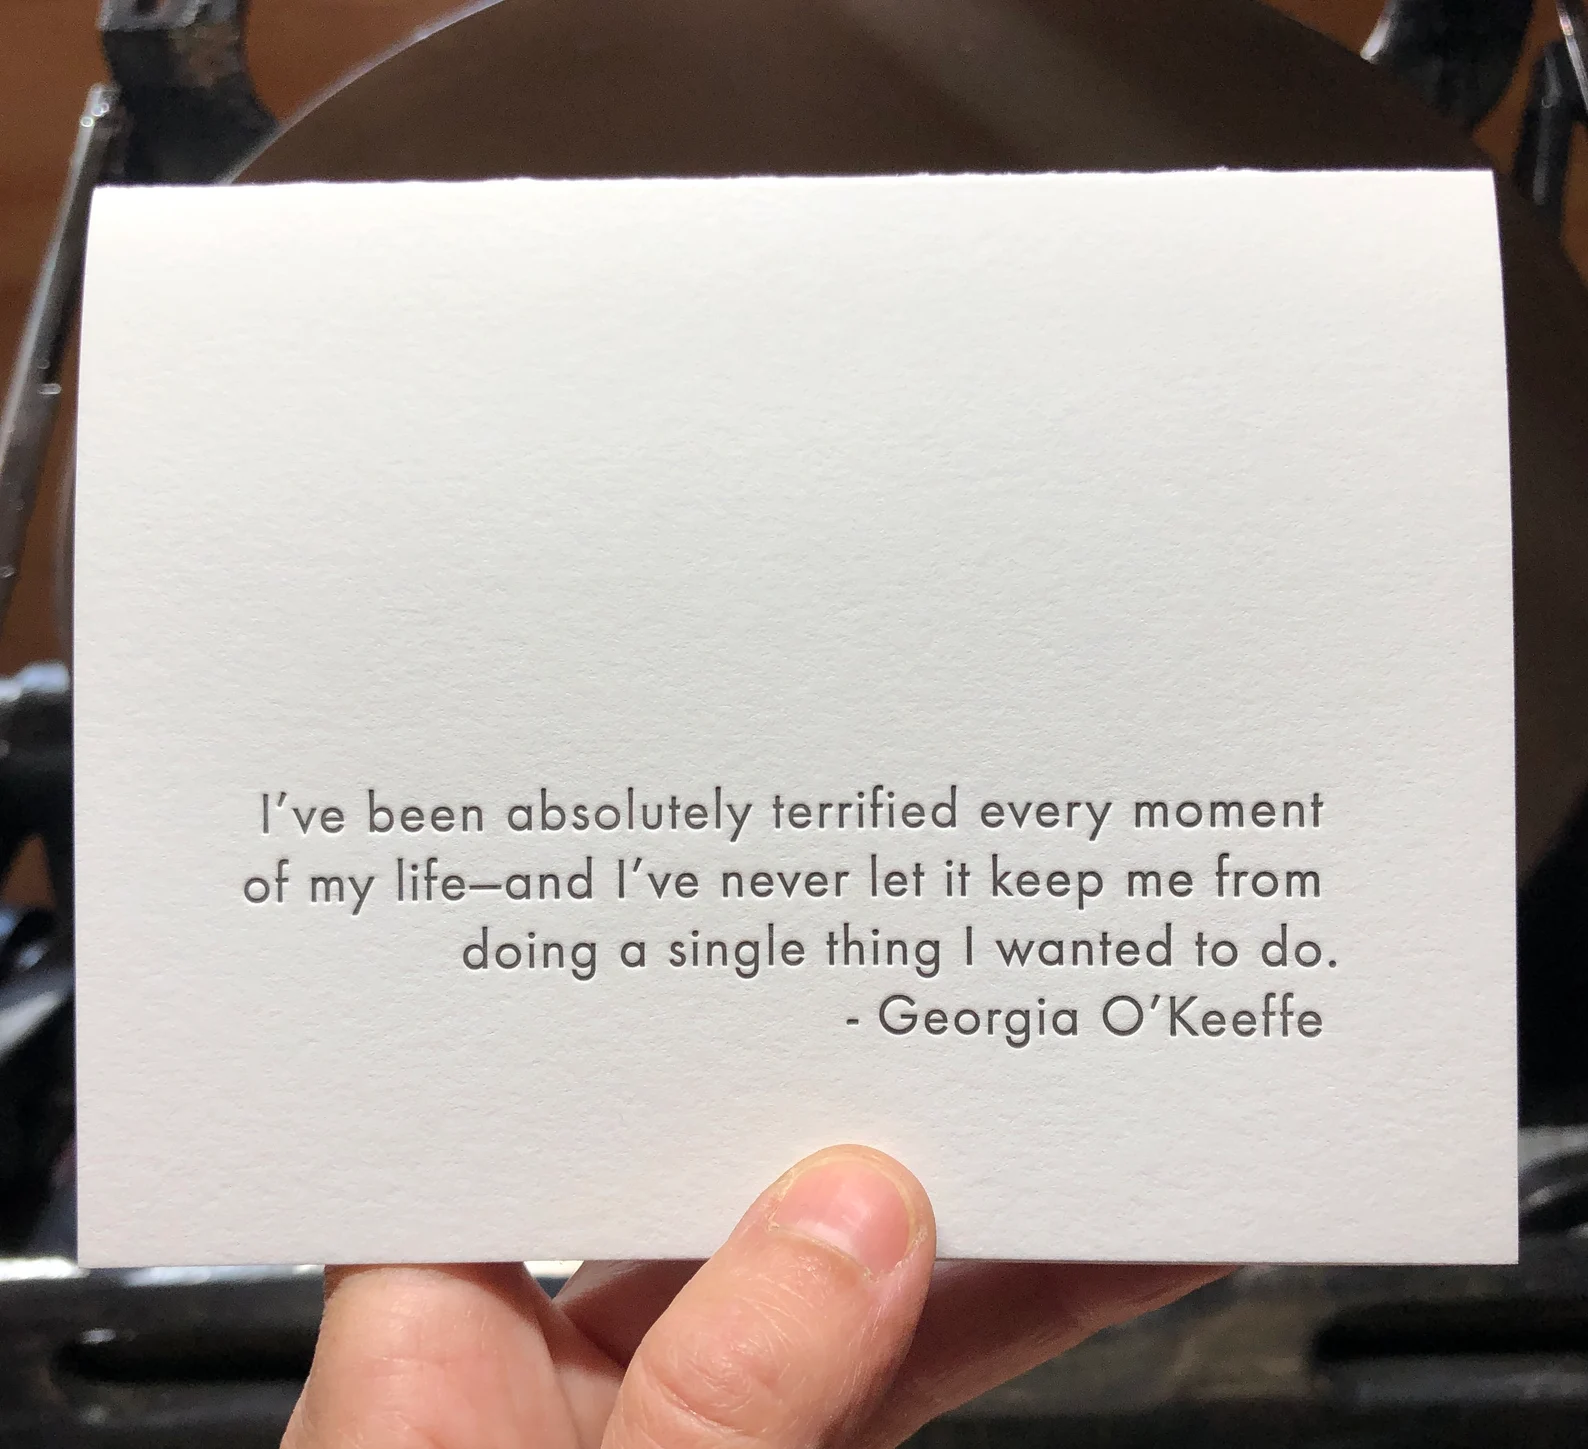 Georgia O’Keeffe greeting card with the quote, “I’ve been absolutely terrified every moment of my life—and I’ve never let it keep me from doing a single thing I wanted to do.”